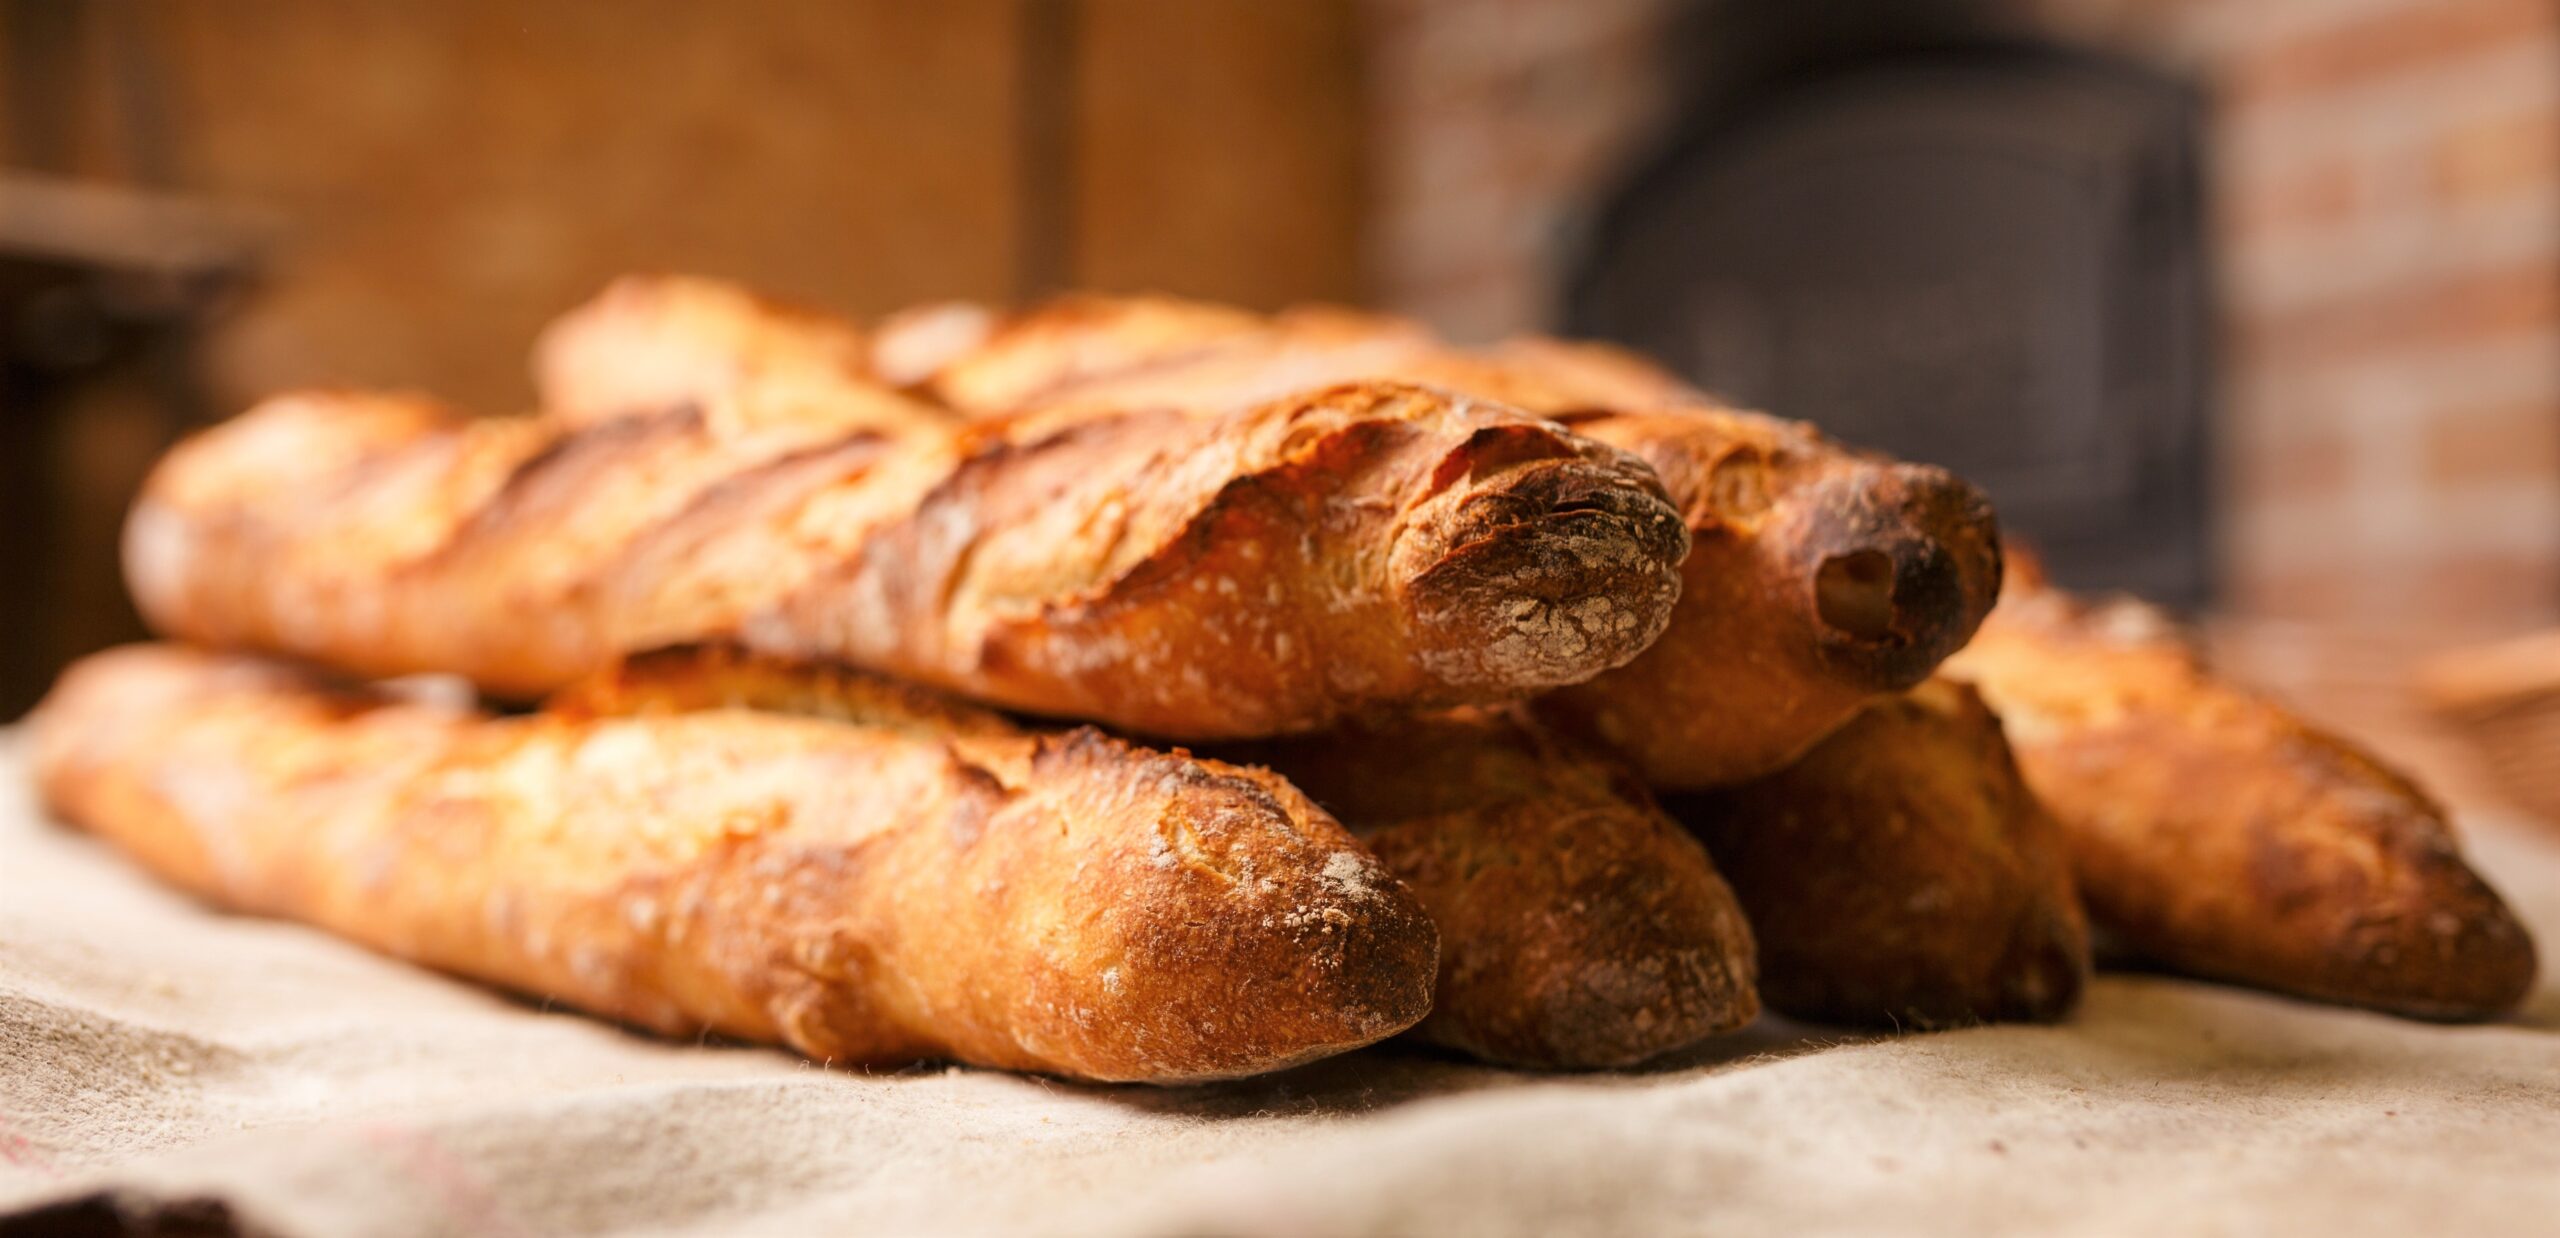 Five freshly bakes baguettes are sitting on a wooden table covered with a thick white linen tablecloth.